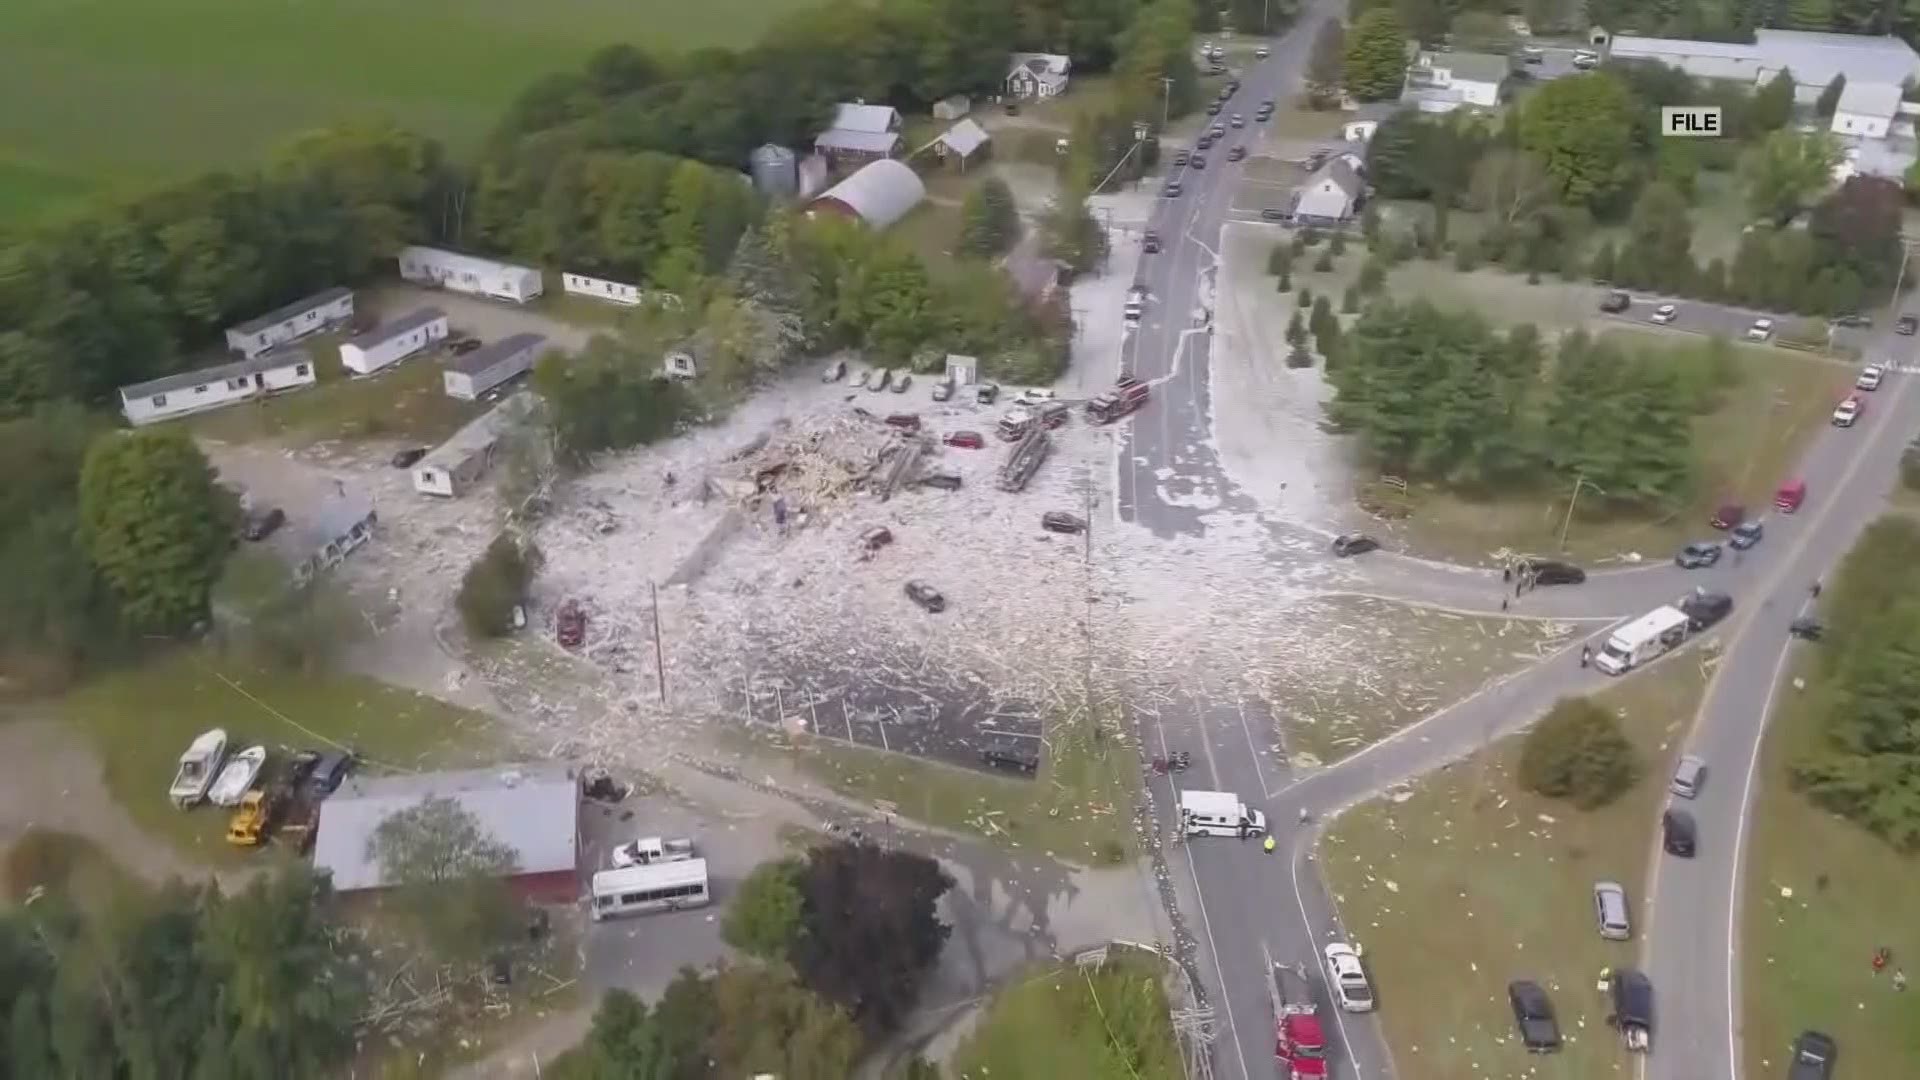 How the Farmington explosion one year ago changed Maine state law